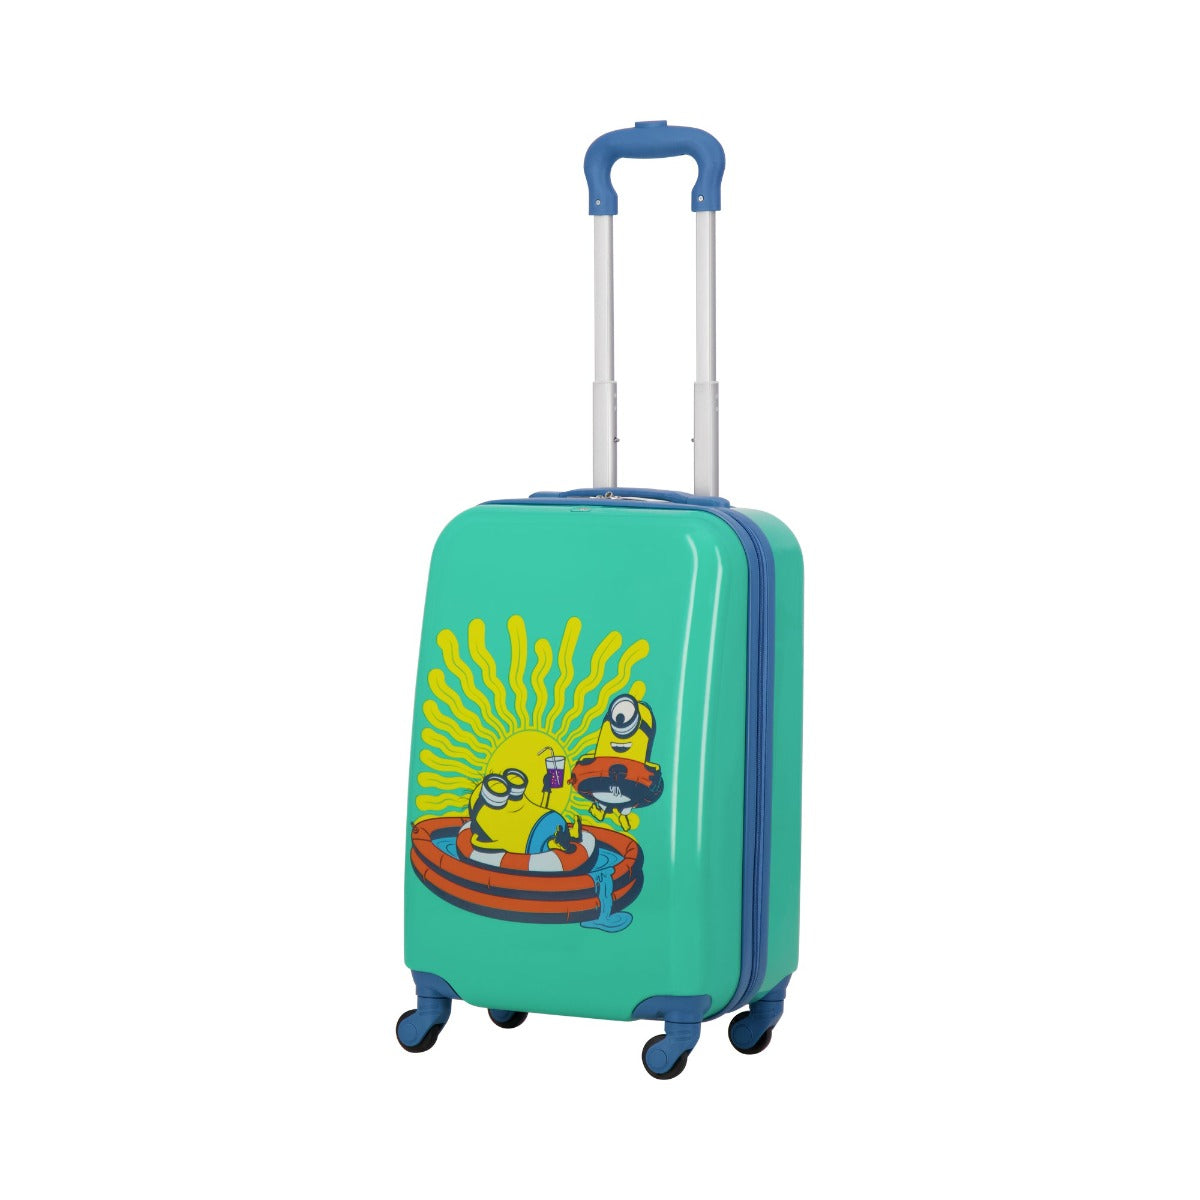 Ful Minions Vacation matching 2 piece set - 21" carry-on spinner suitcase for kids